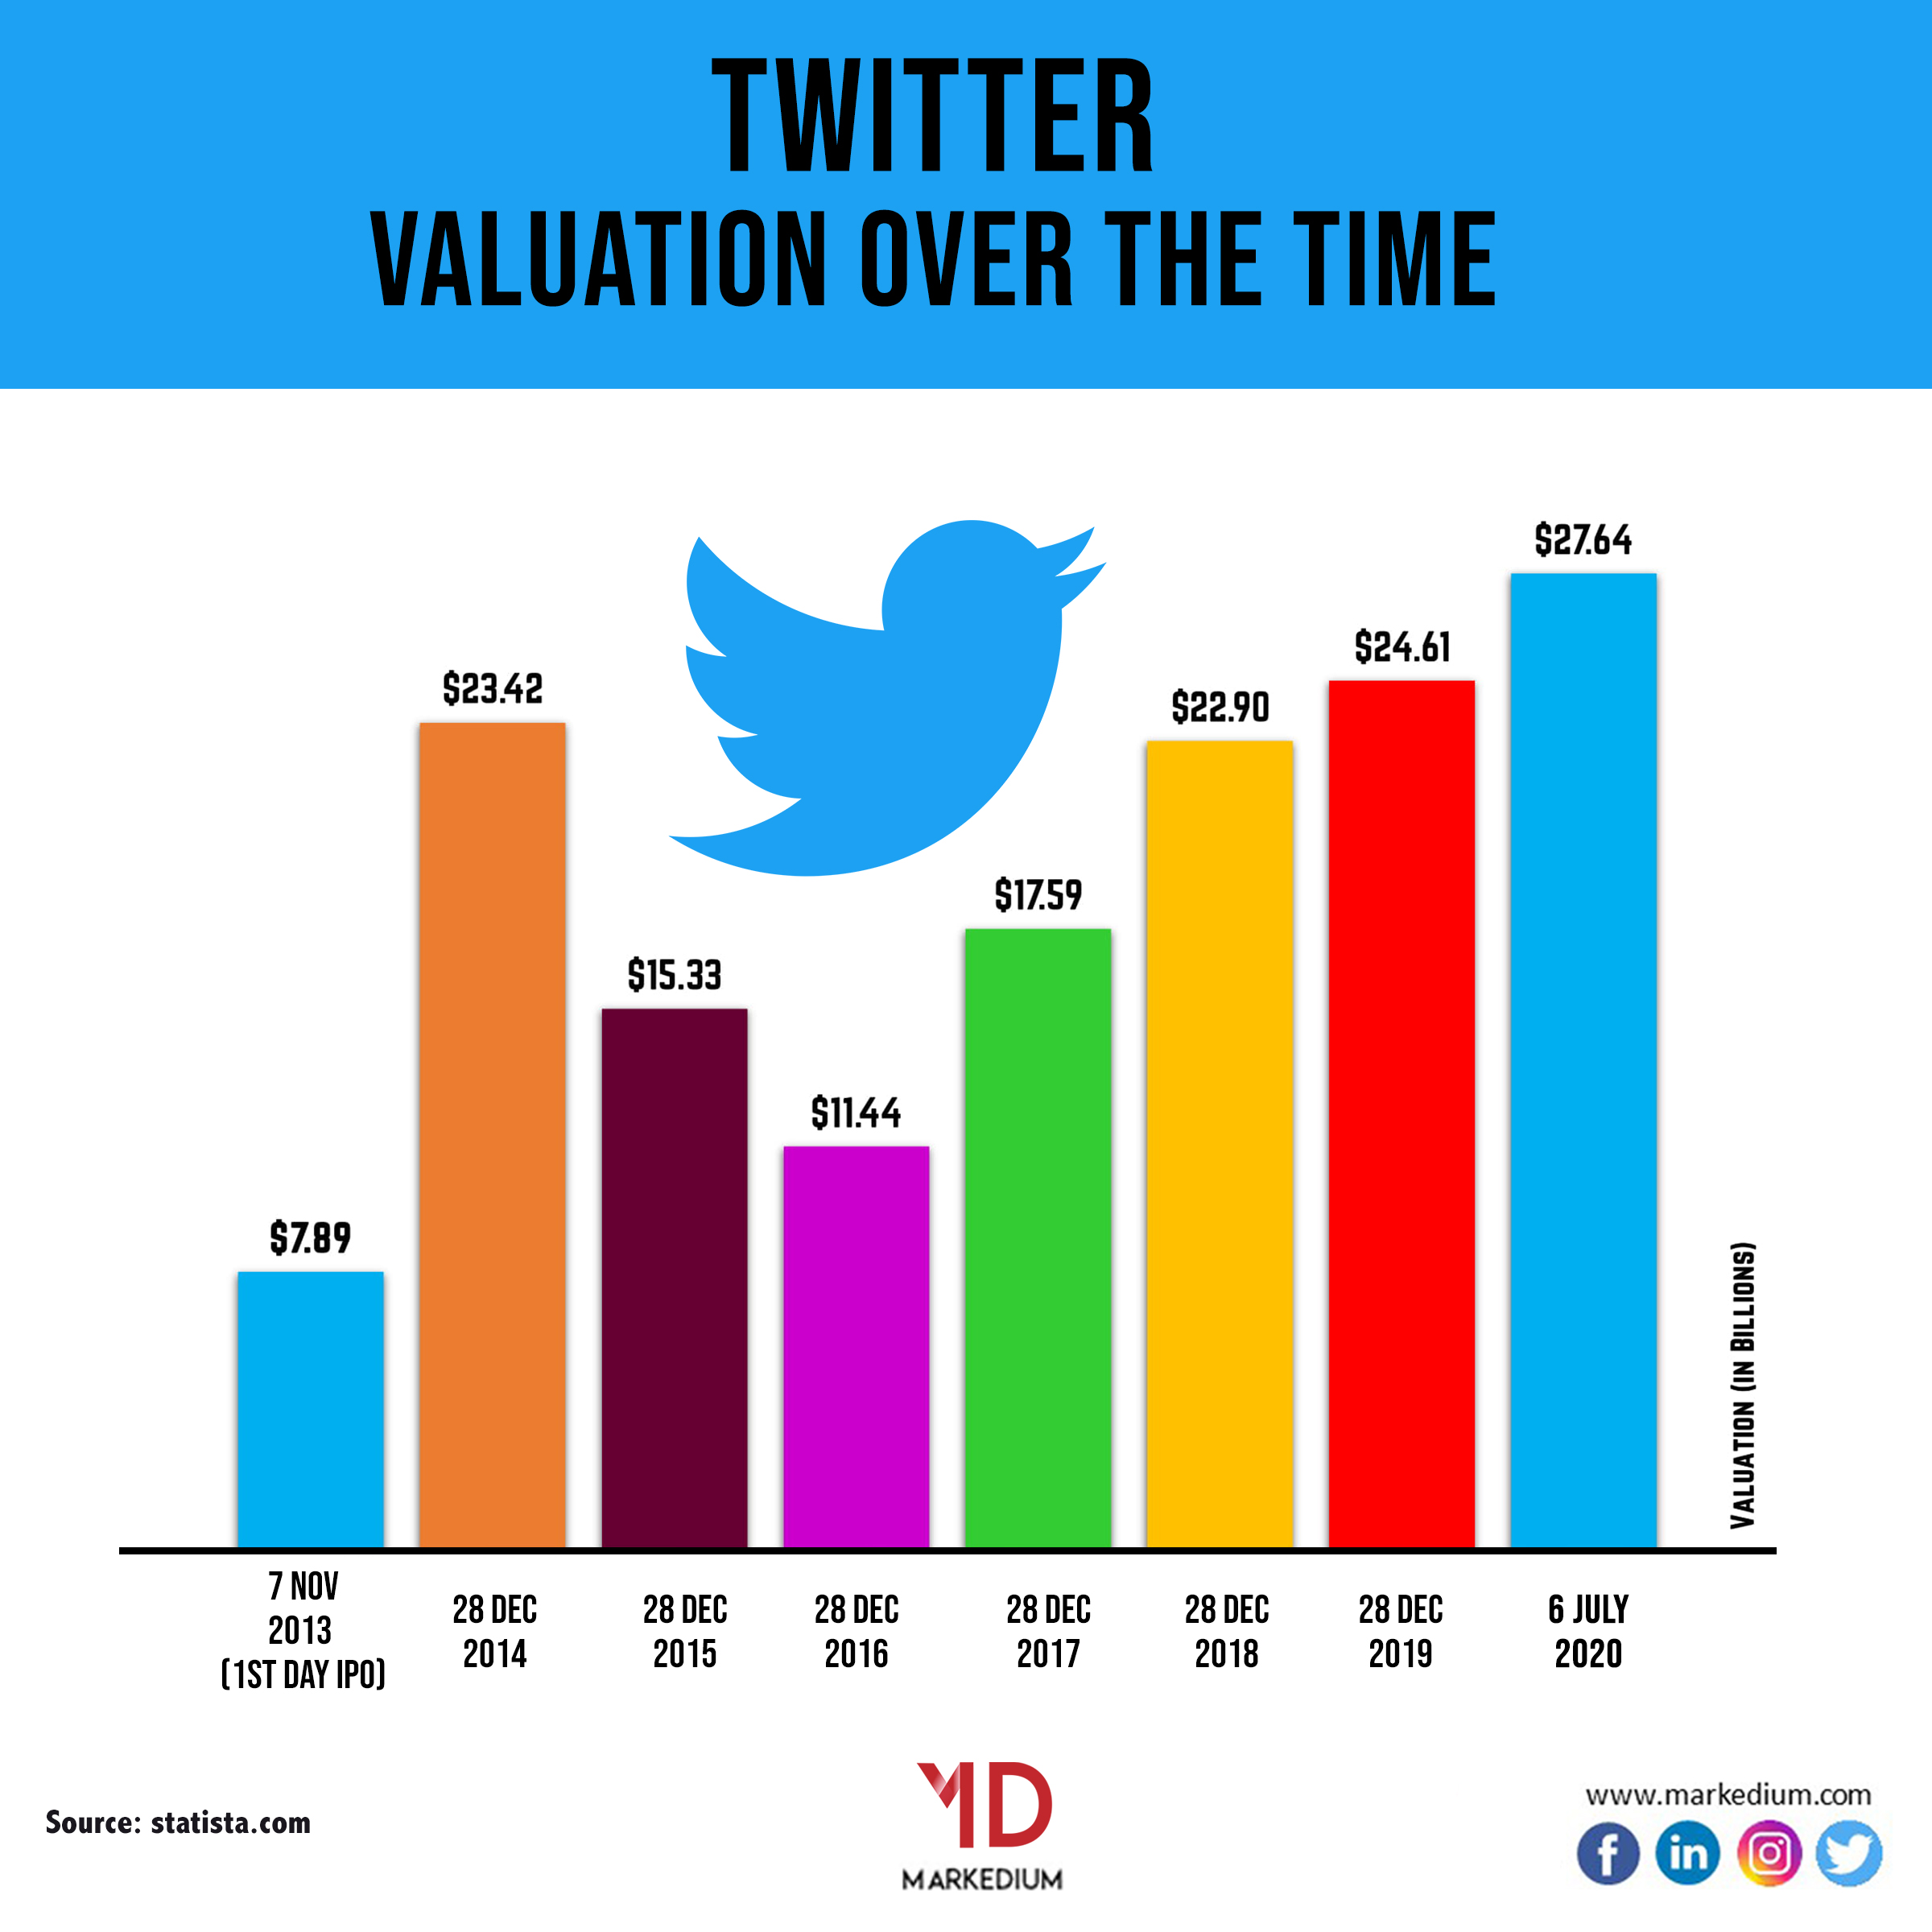 Twitter valuation over the time markedium